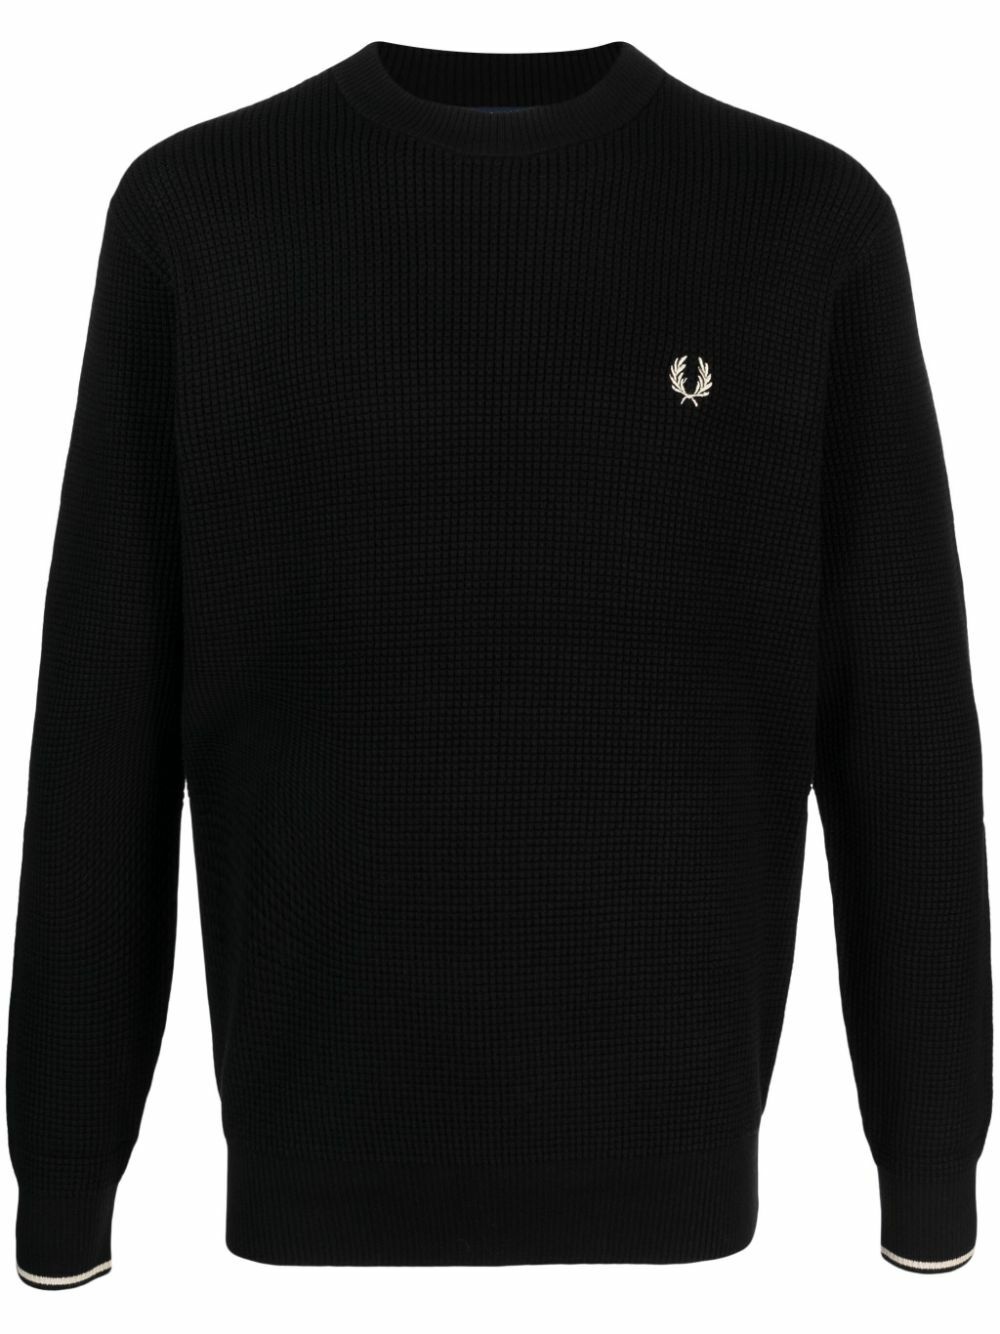 FRED PERRY - Logo Cotton Crewneck Jumper